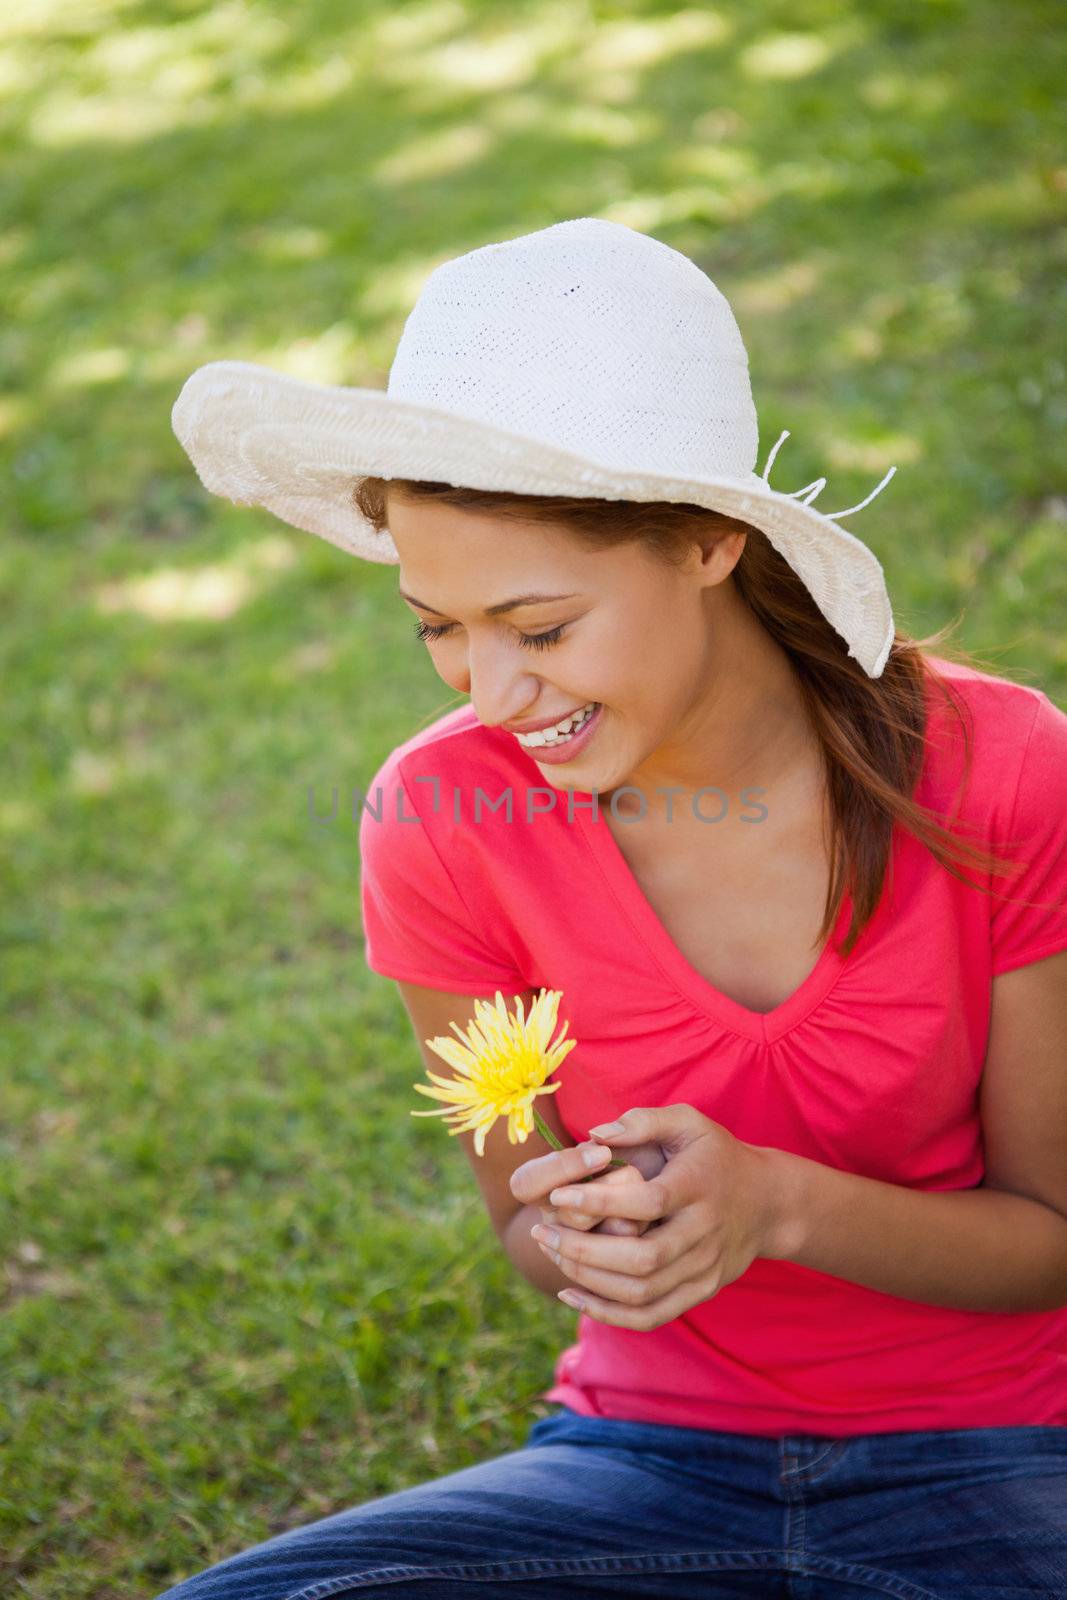 Woman laughing while wearing a white hat and holding a yellow flower as she sits on the grass